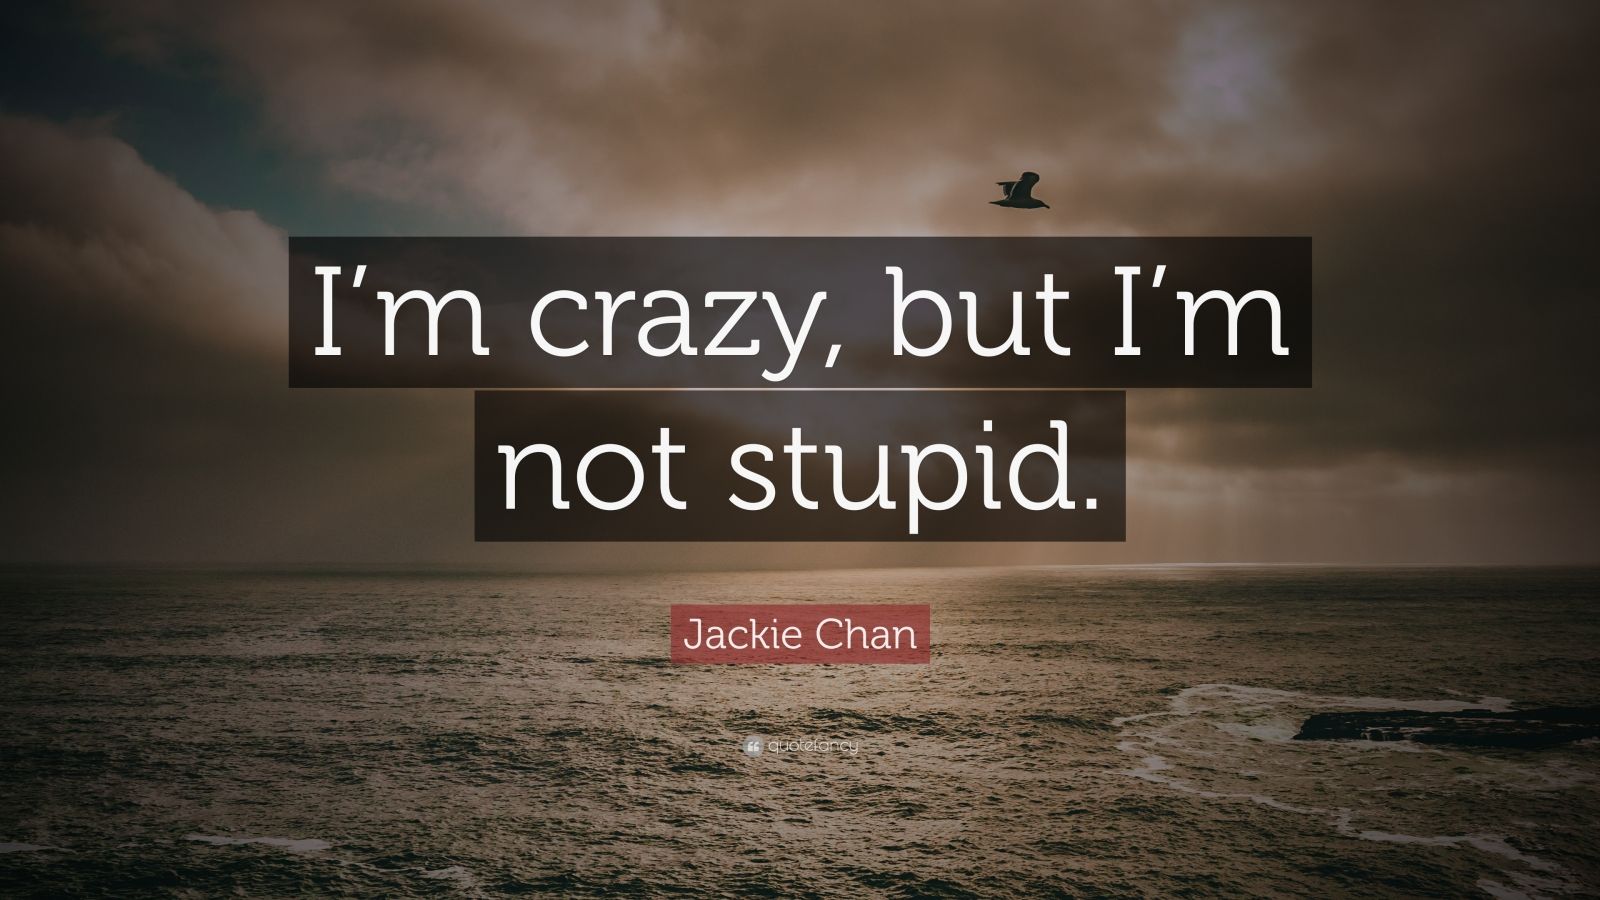 Jackie Chan Quote: "I'm crazy, but I'm not stupid." (7 ...